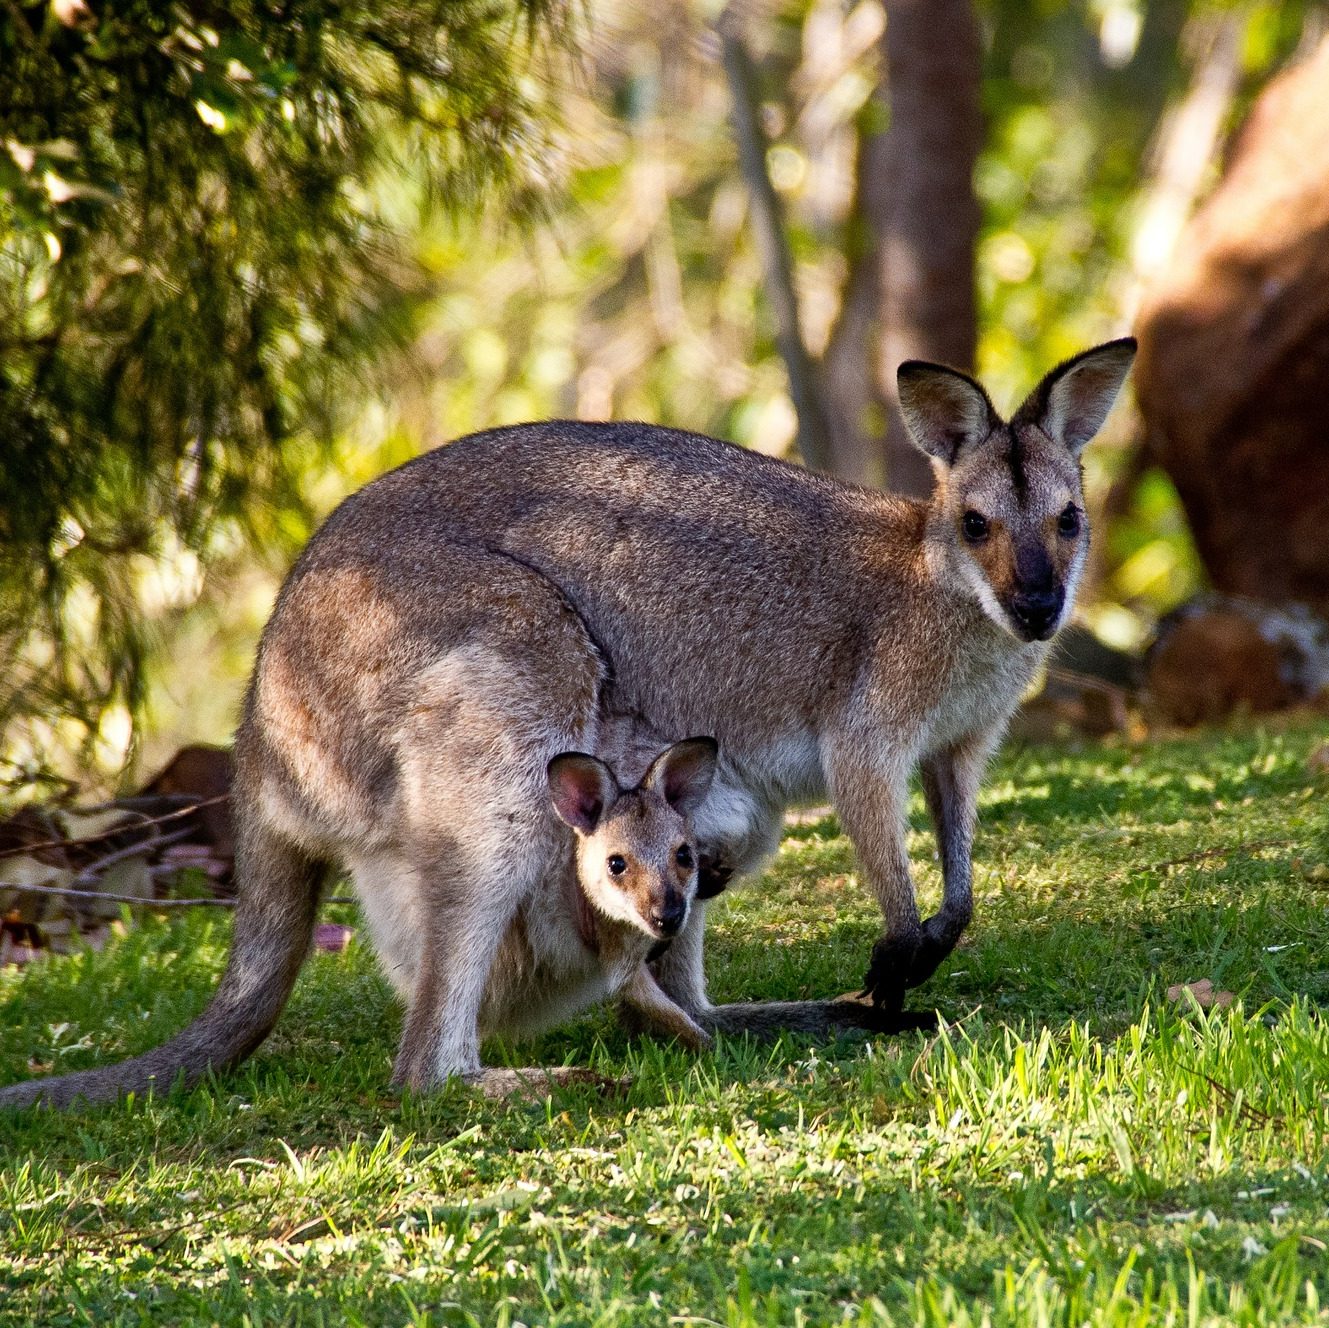 A kangaroo with her joey in her pouch.